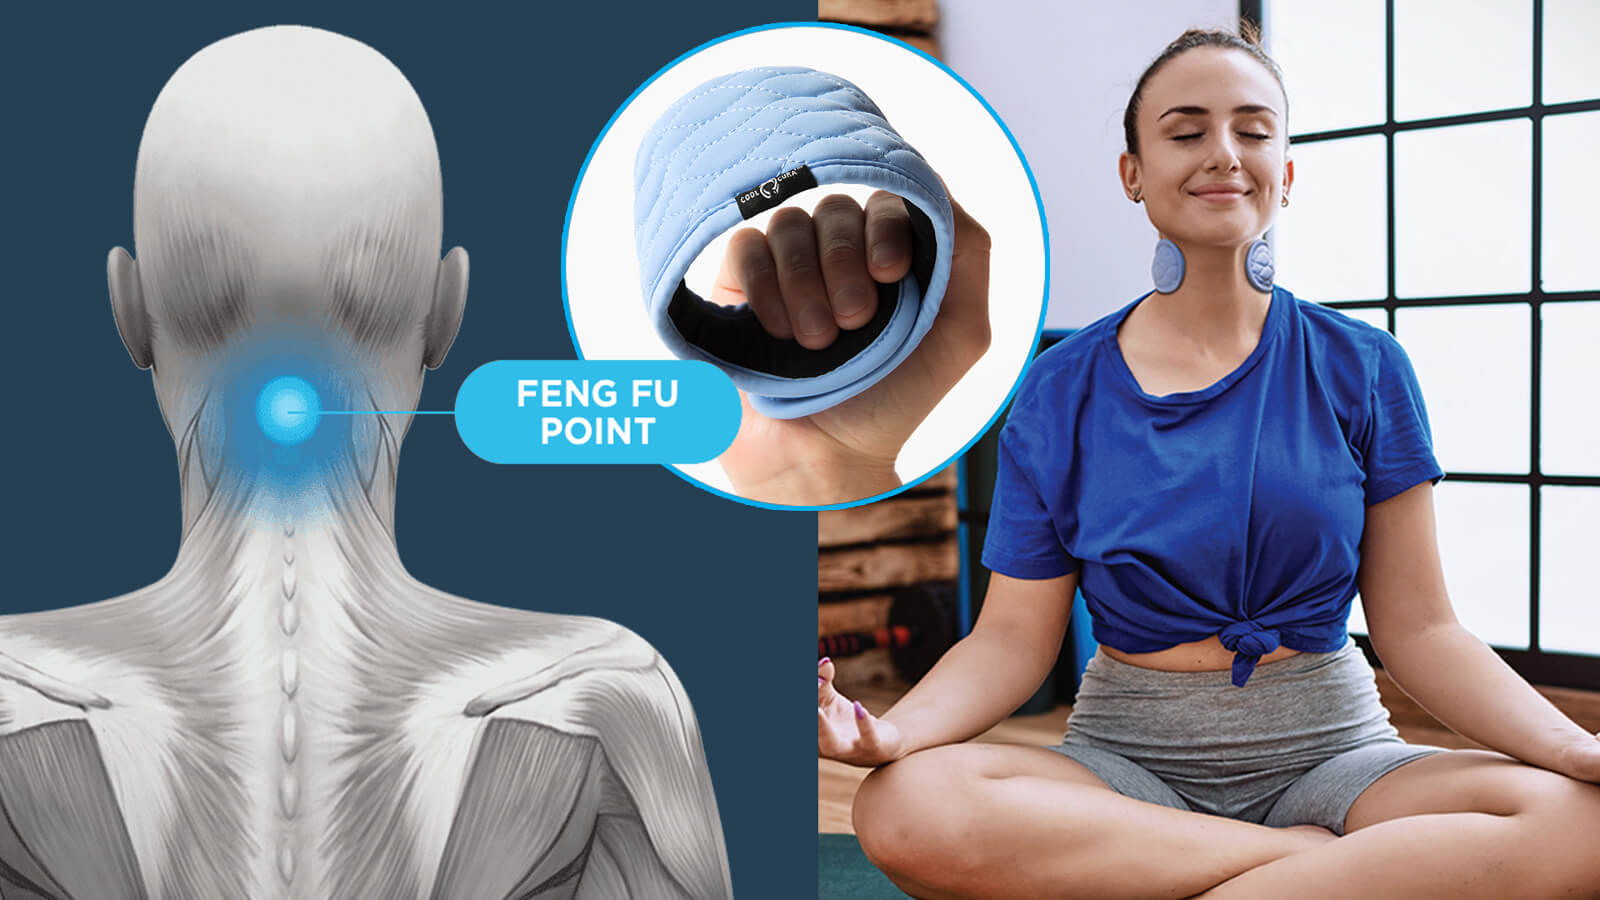 This Ancient Acupressure Point is The New Secret to All Naturally Relieving Headaches, Neck Pain, Stress, Insomnia & More